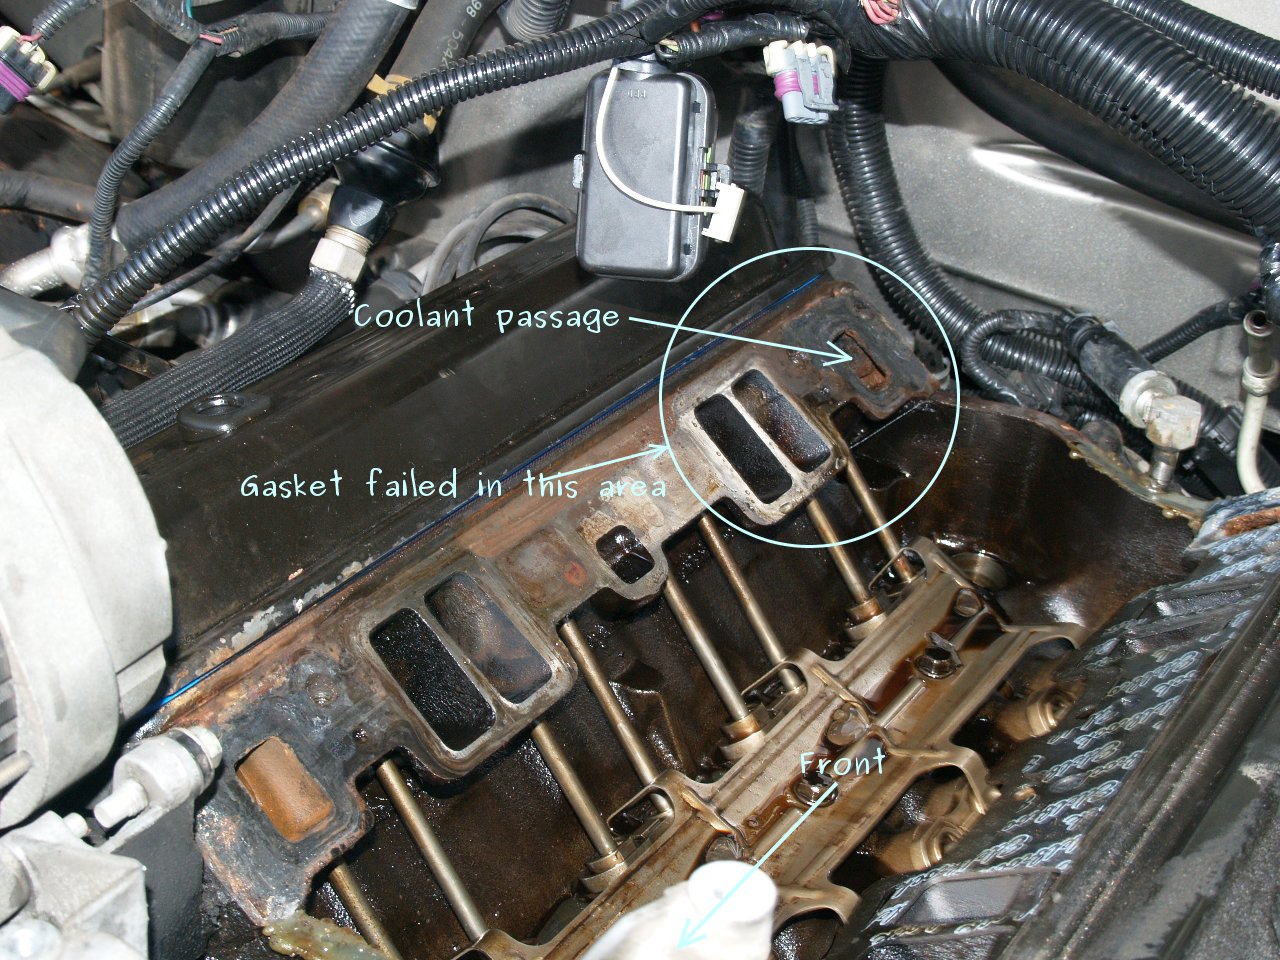 See C2501 in engine